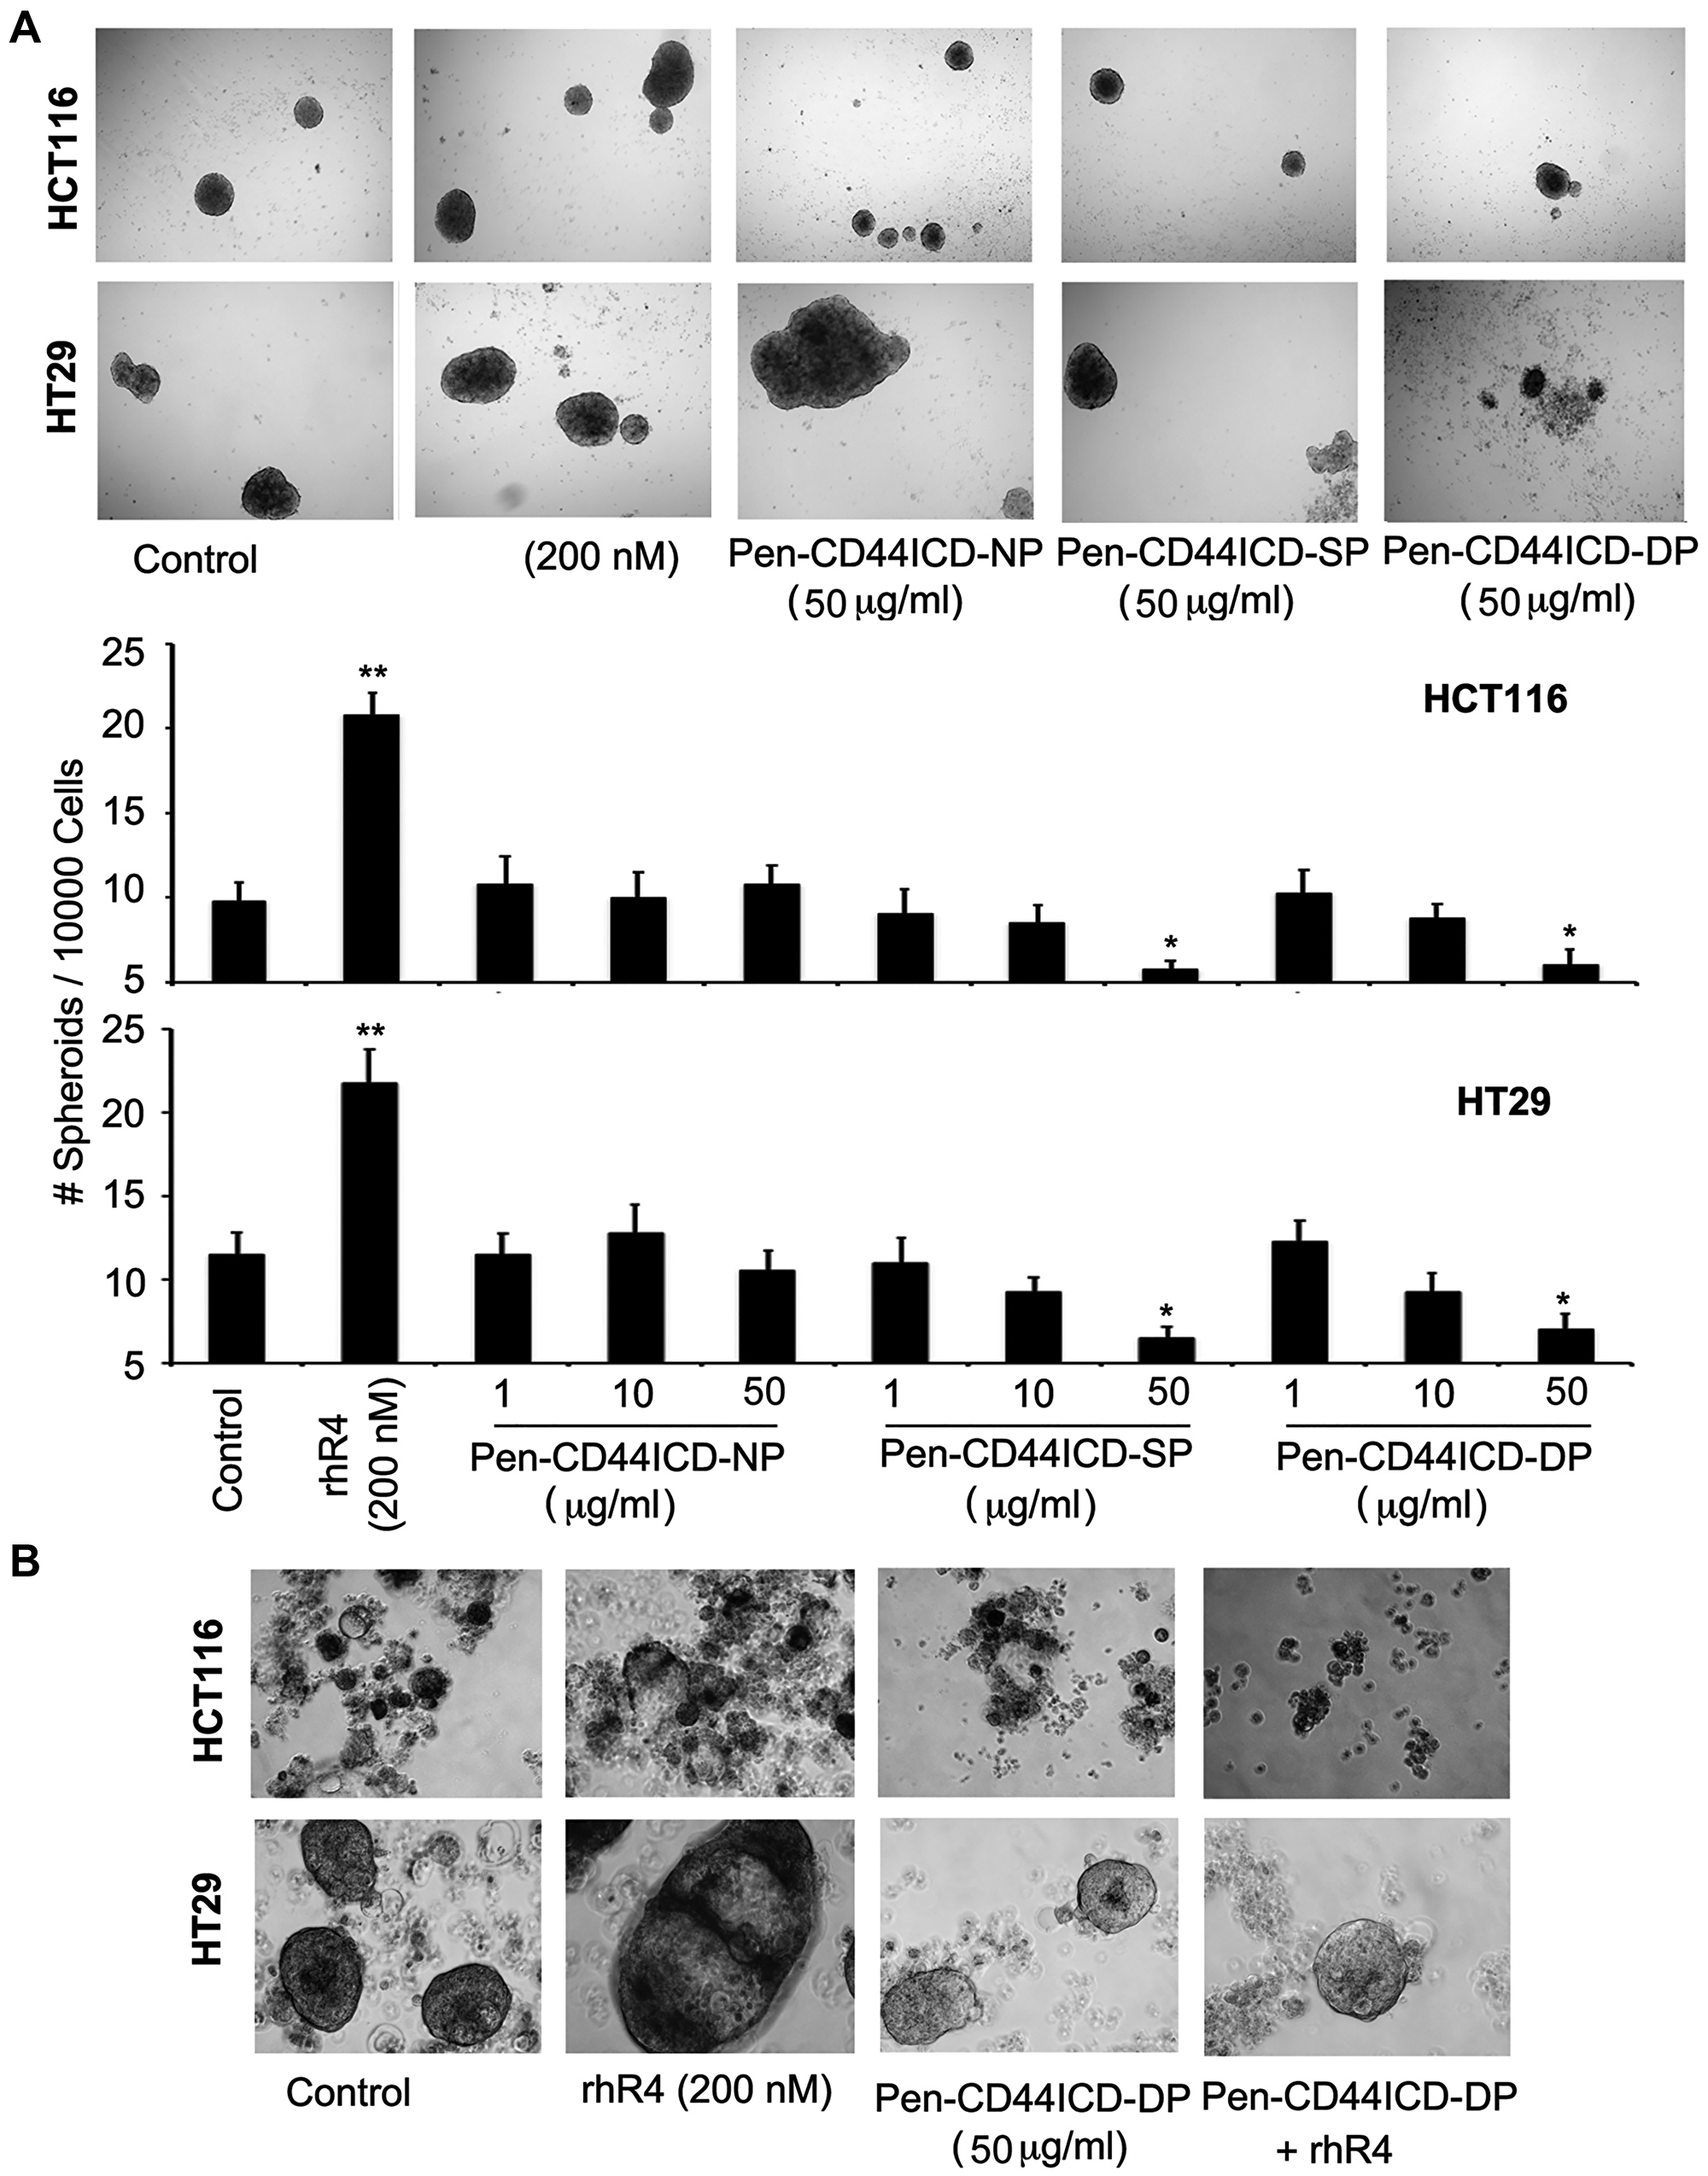 Pen-CD44ICD peptides interfering with nuclear CD44ICD activity inhibit stemness of CRC cells.